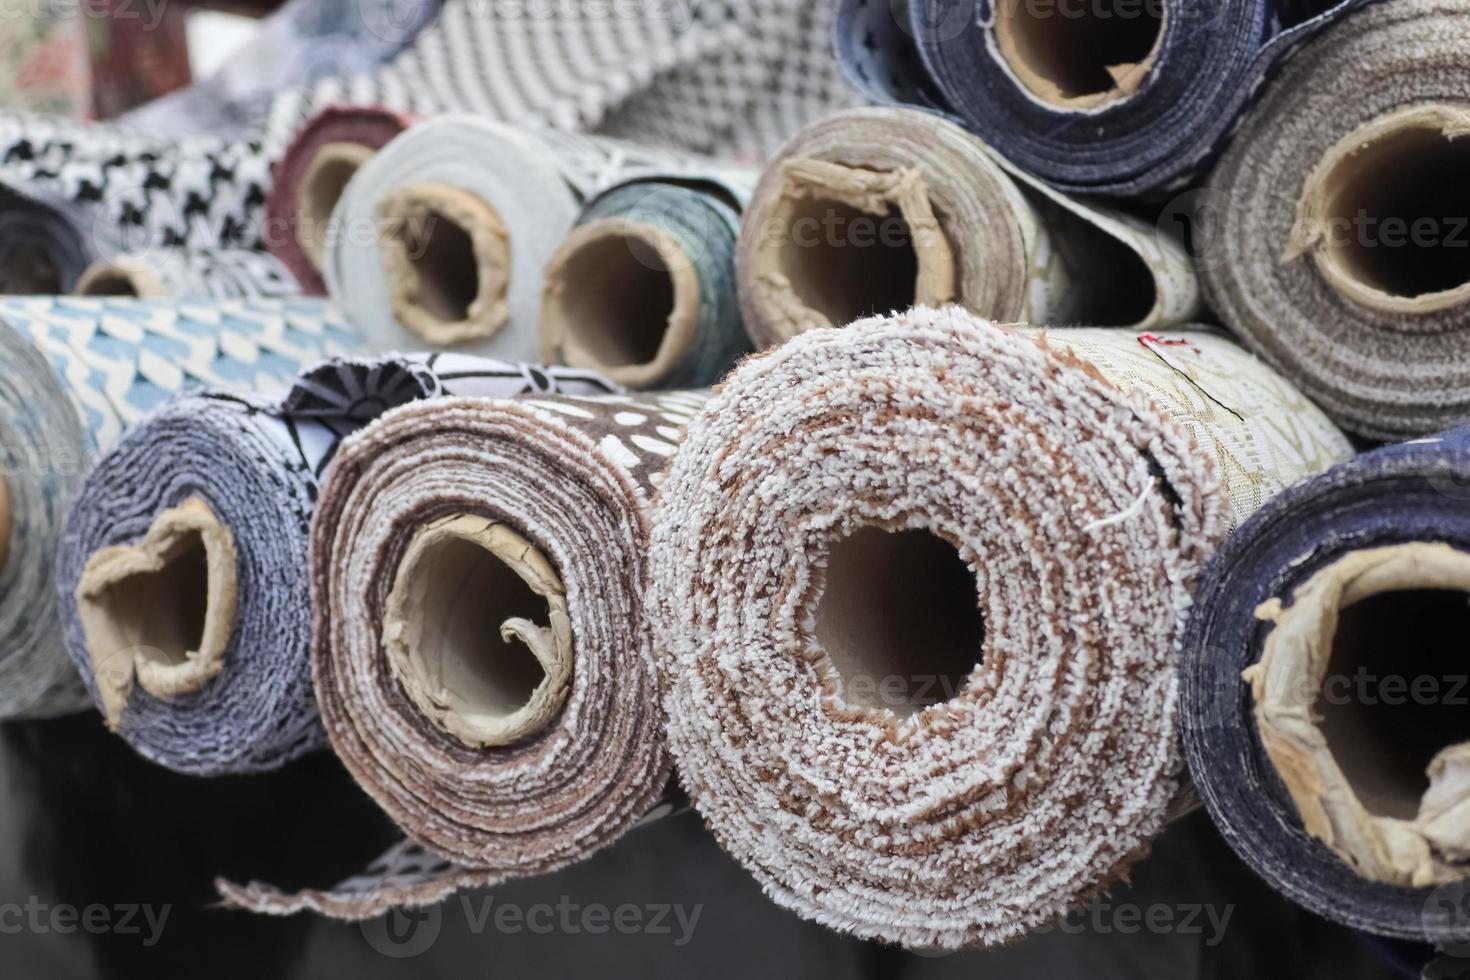 Samples of cloth and fabrics in different colors found at a fabrics market photo